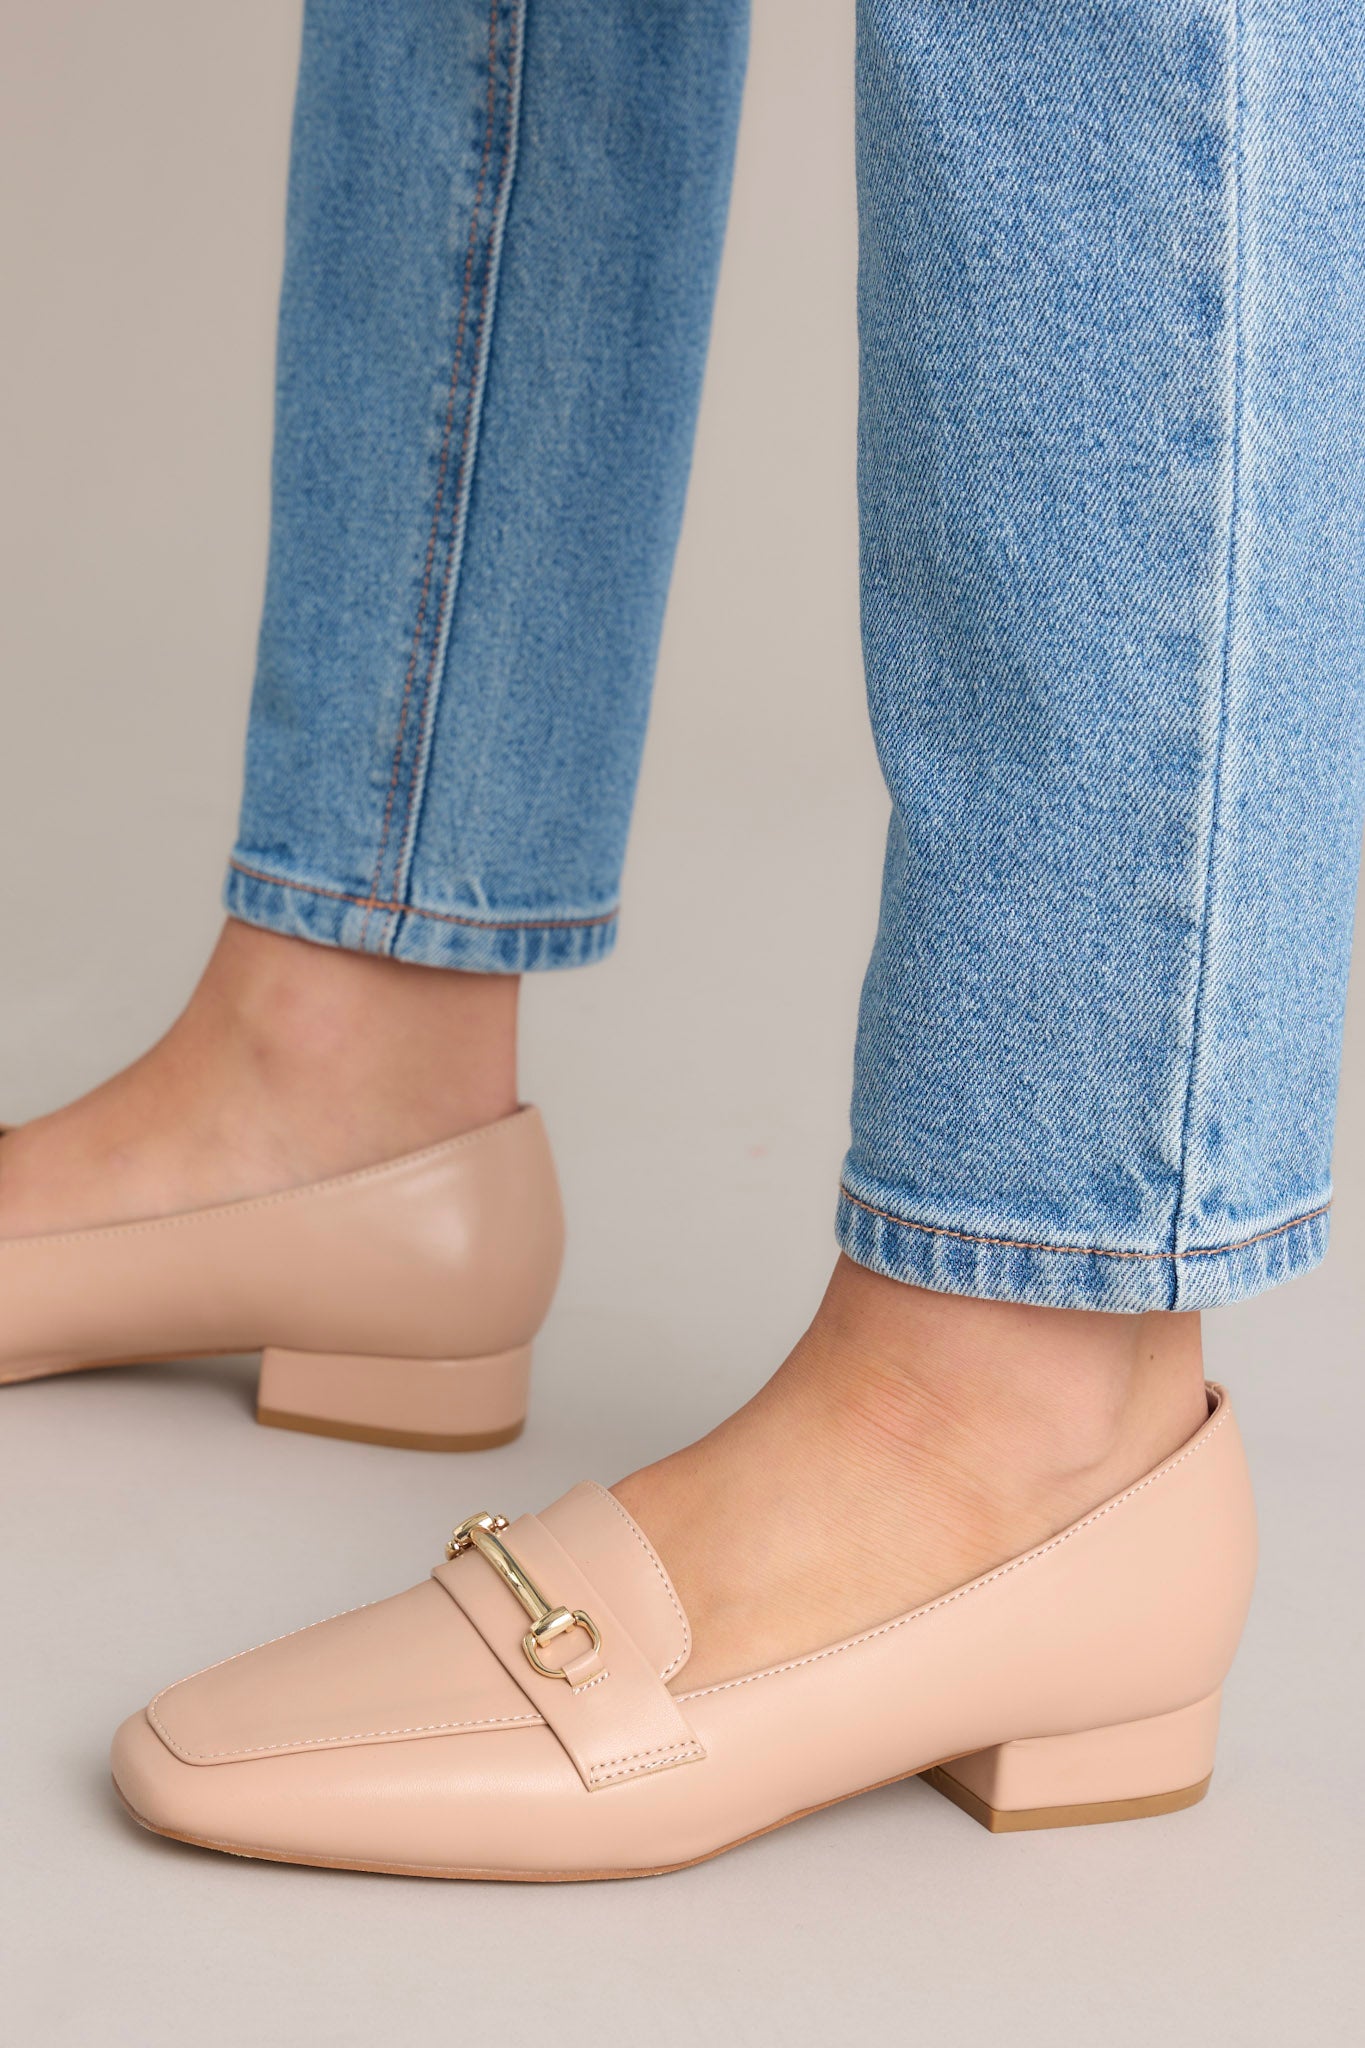 These beige loafers feature a slip on design, a small heel, a square toe, and gold hardware.